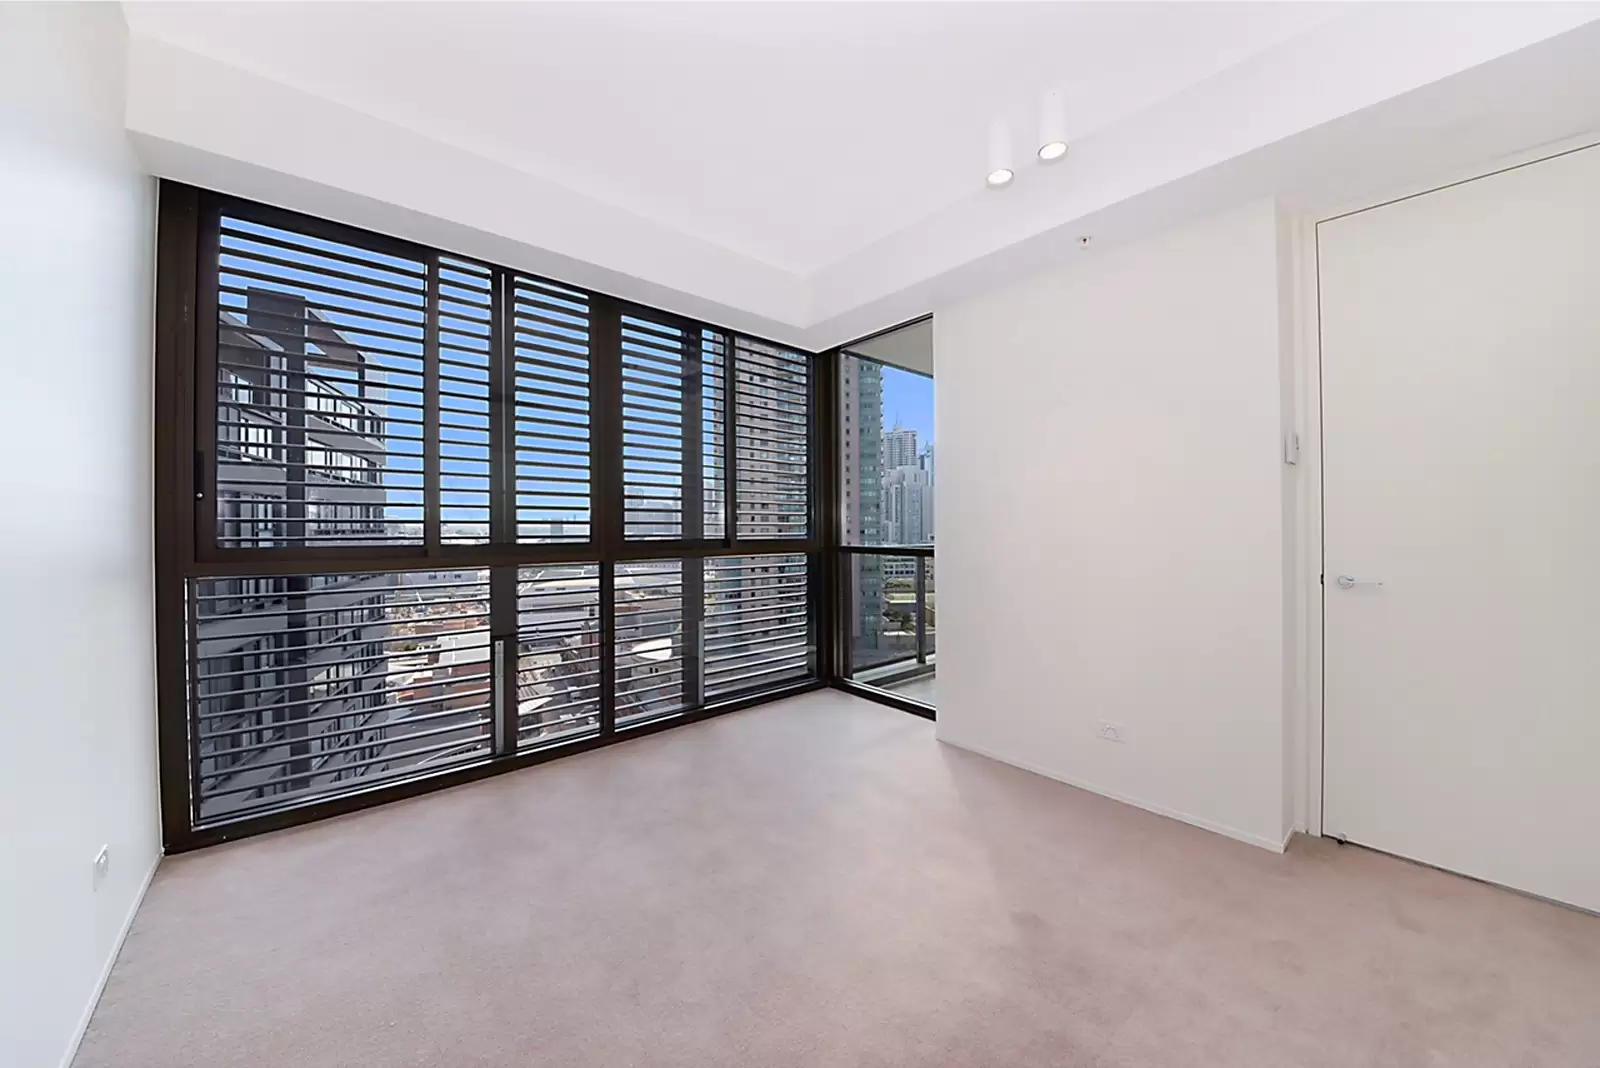 Photo #5: 702/33 Ultimo Road, Haymarket - Sold by Sydney Sotheby's International Realty